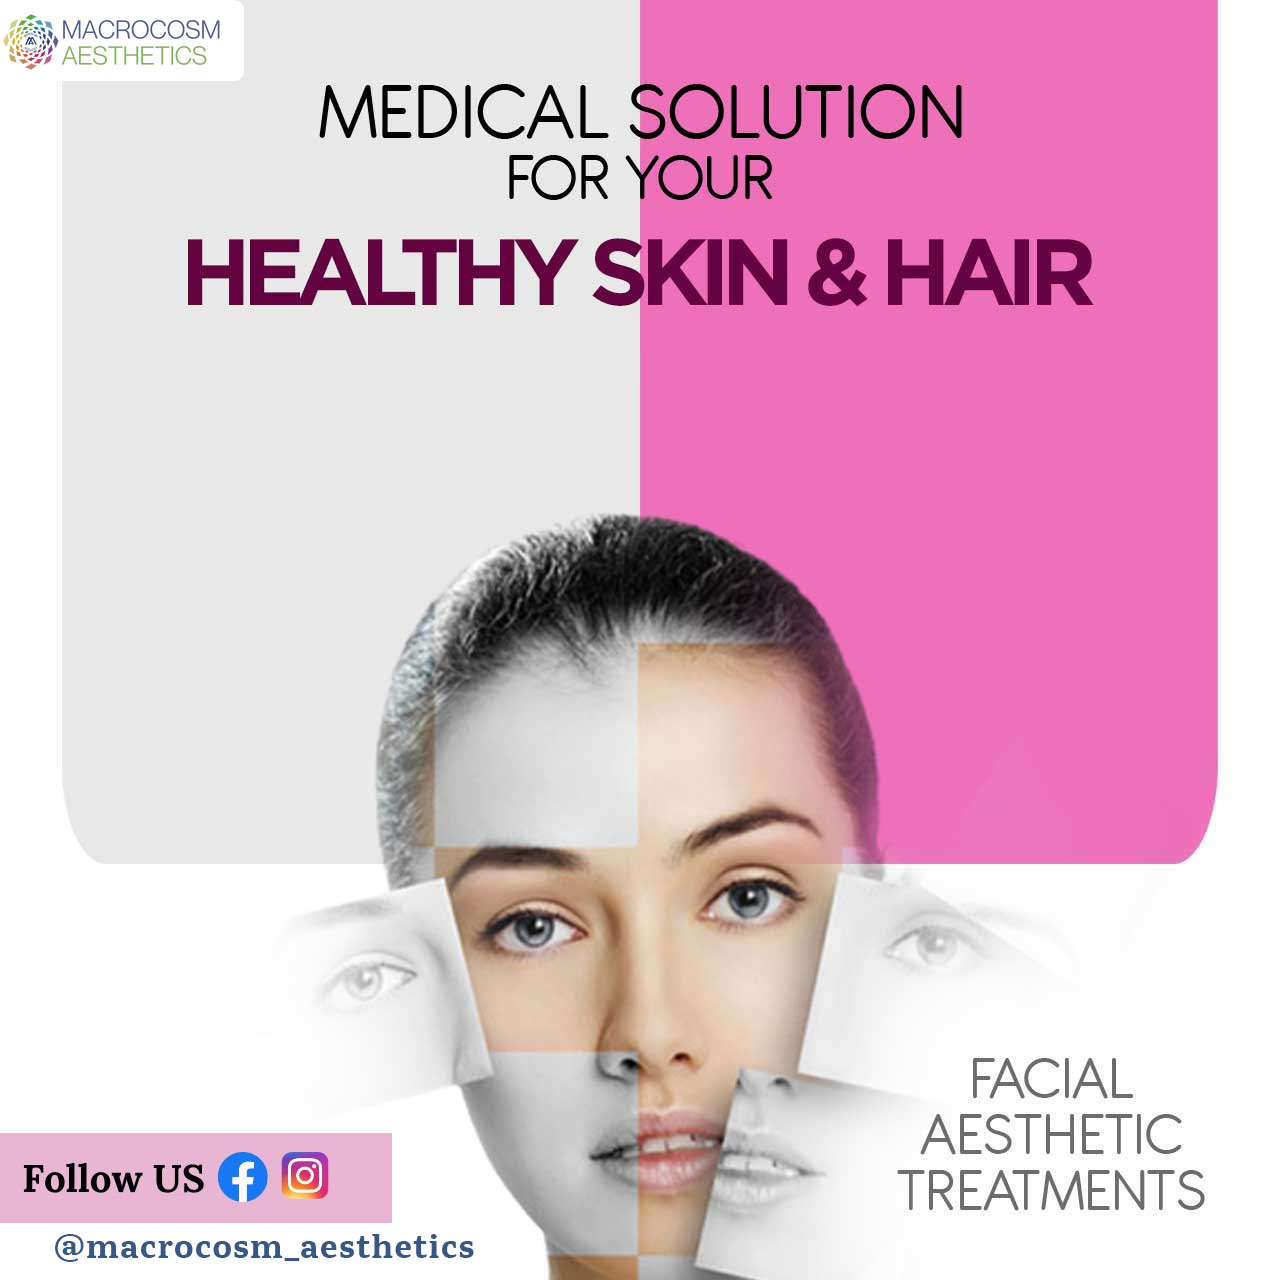 Medical solution for your healthy skin & hair